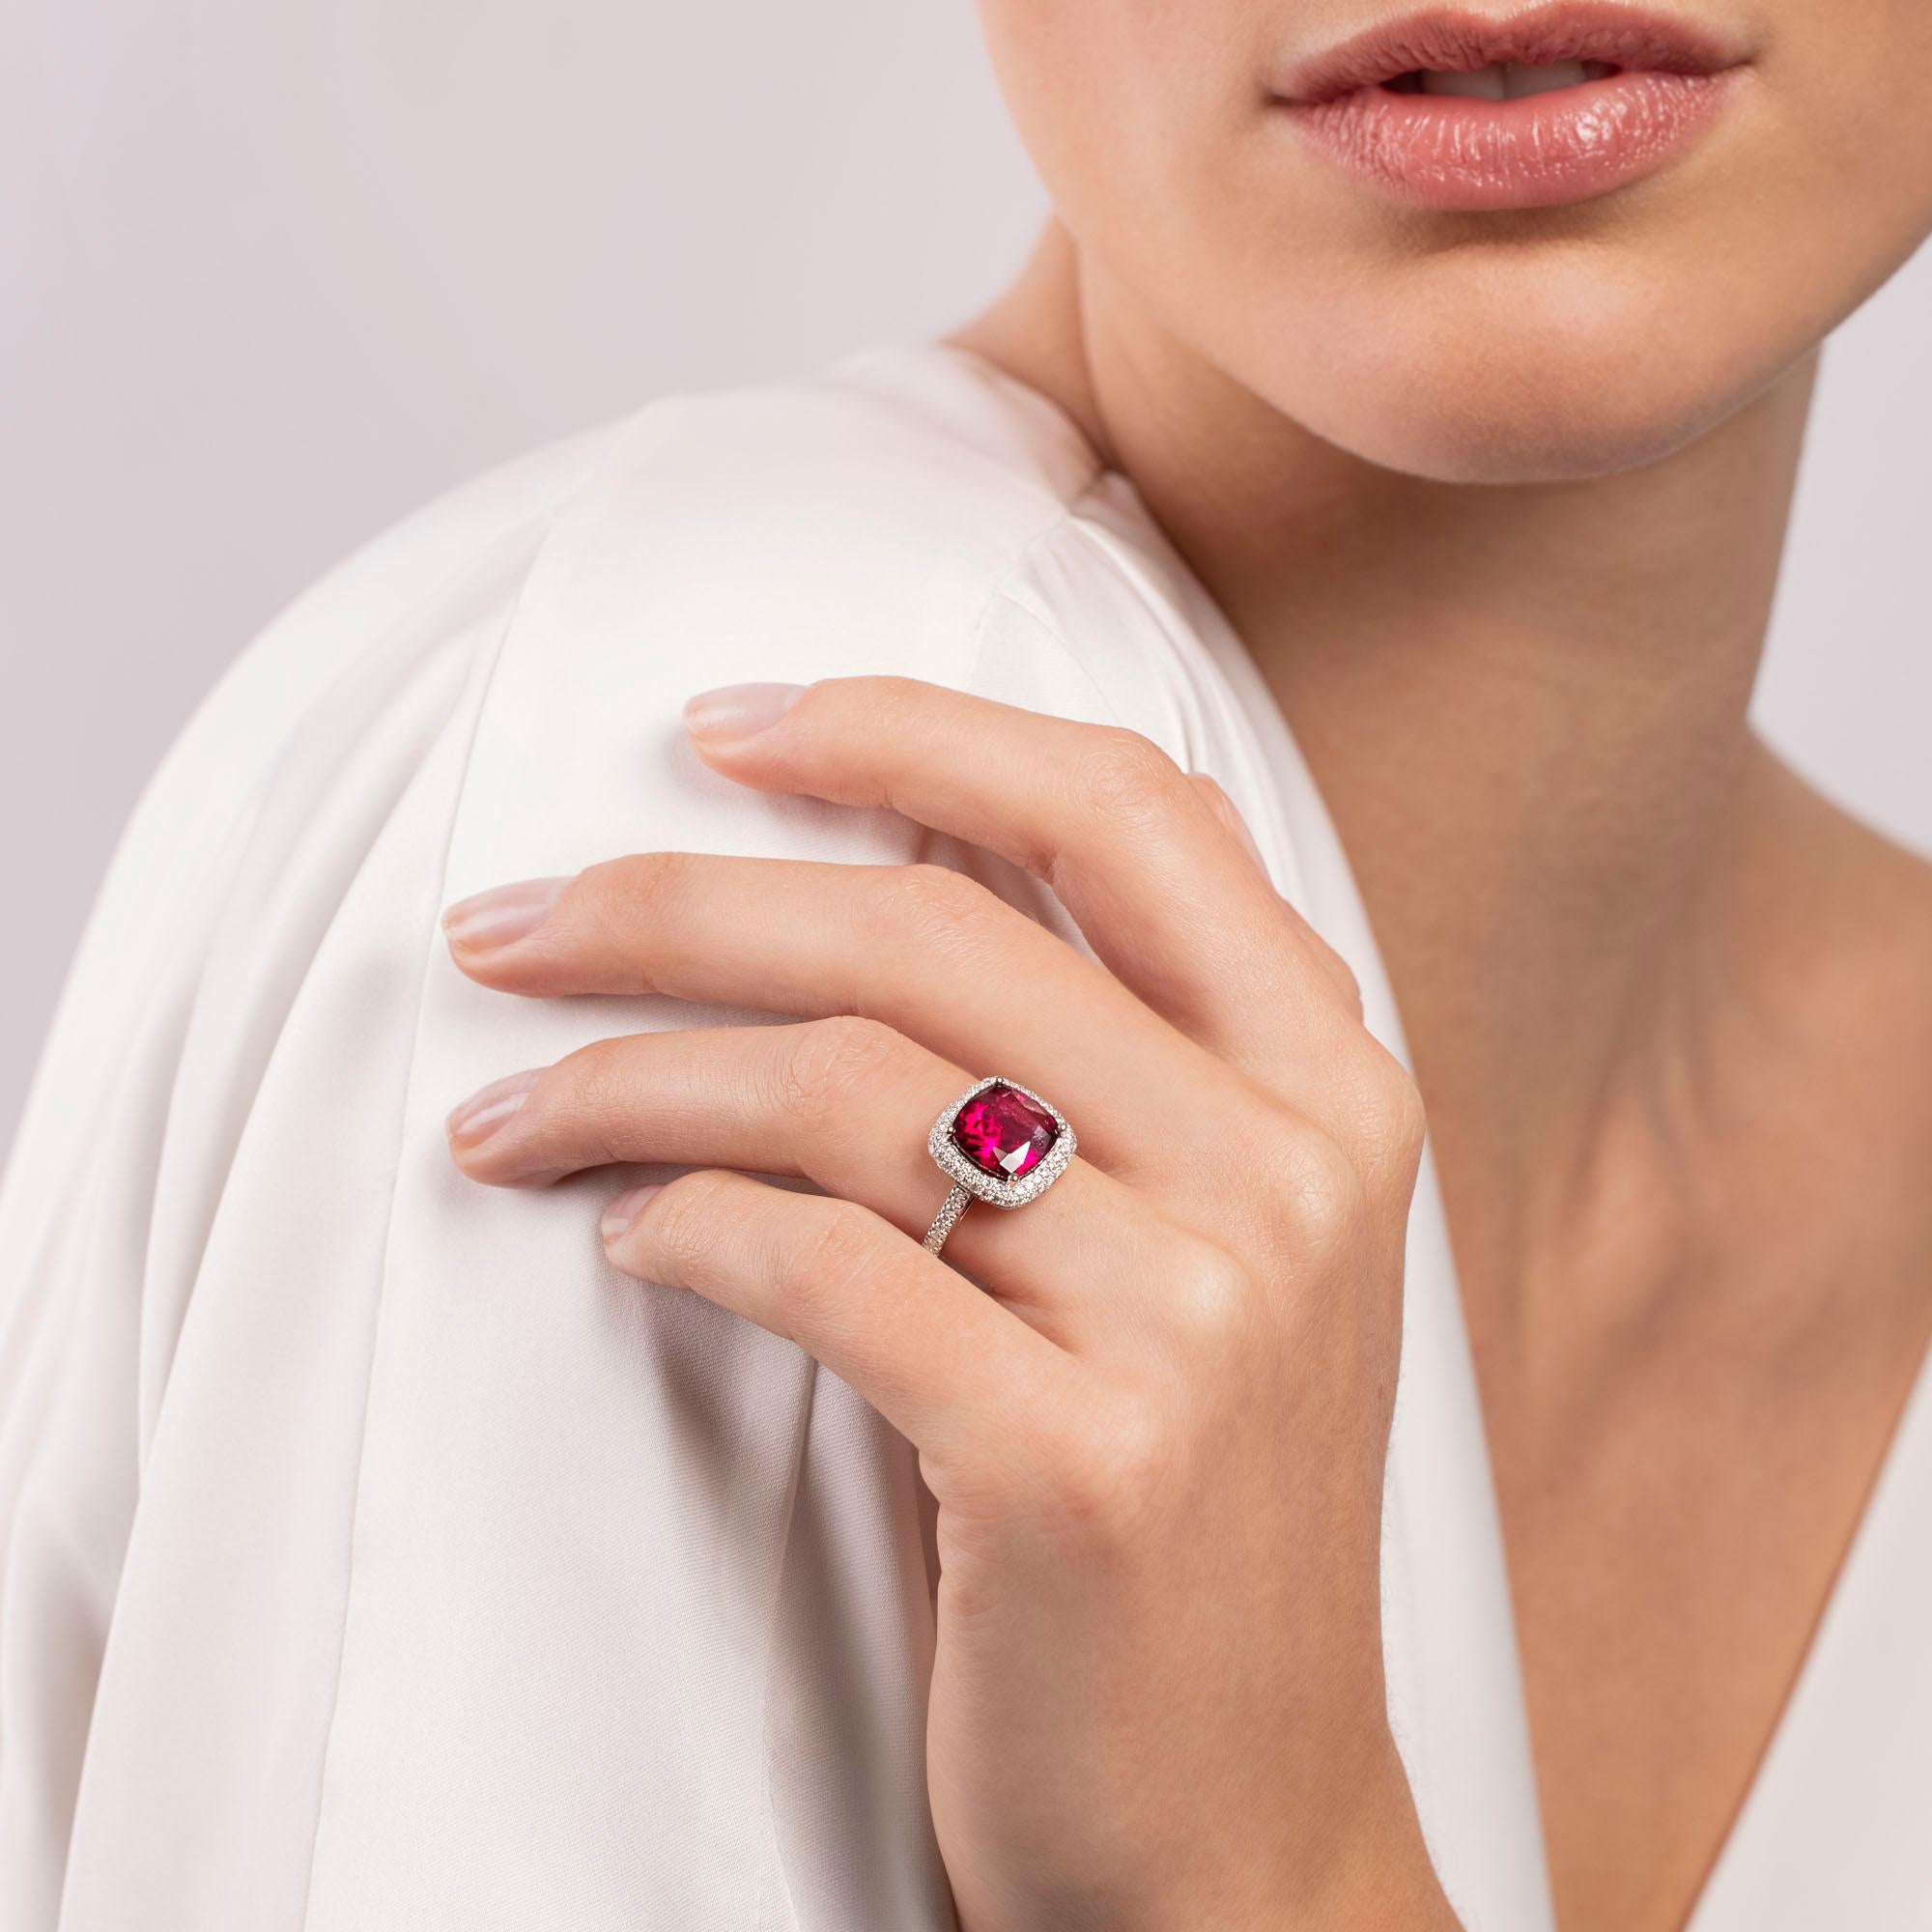 A member of the tourmaline family, Rubellite is desired for its nuances of red. From a mellow pink to the most vivid pigeon blood red, rubellite is not only a mesmerizingly dazzling gemstone but it makes for one of the most wearable gems as well.